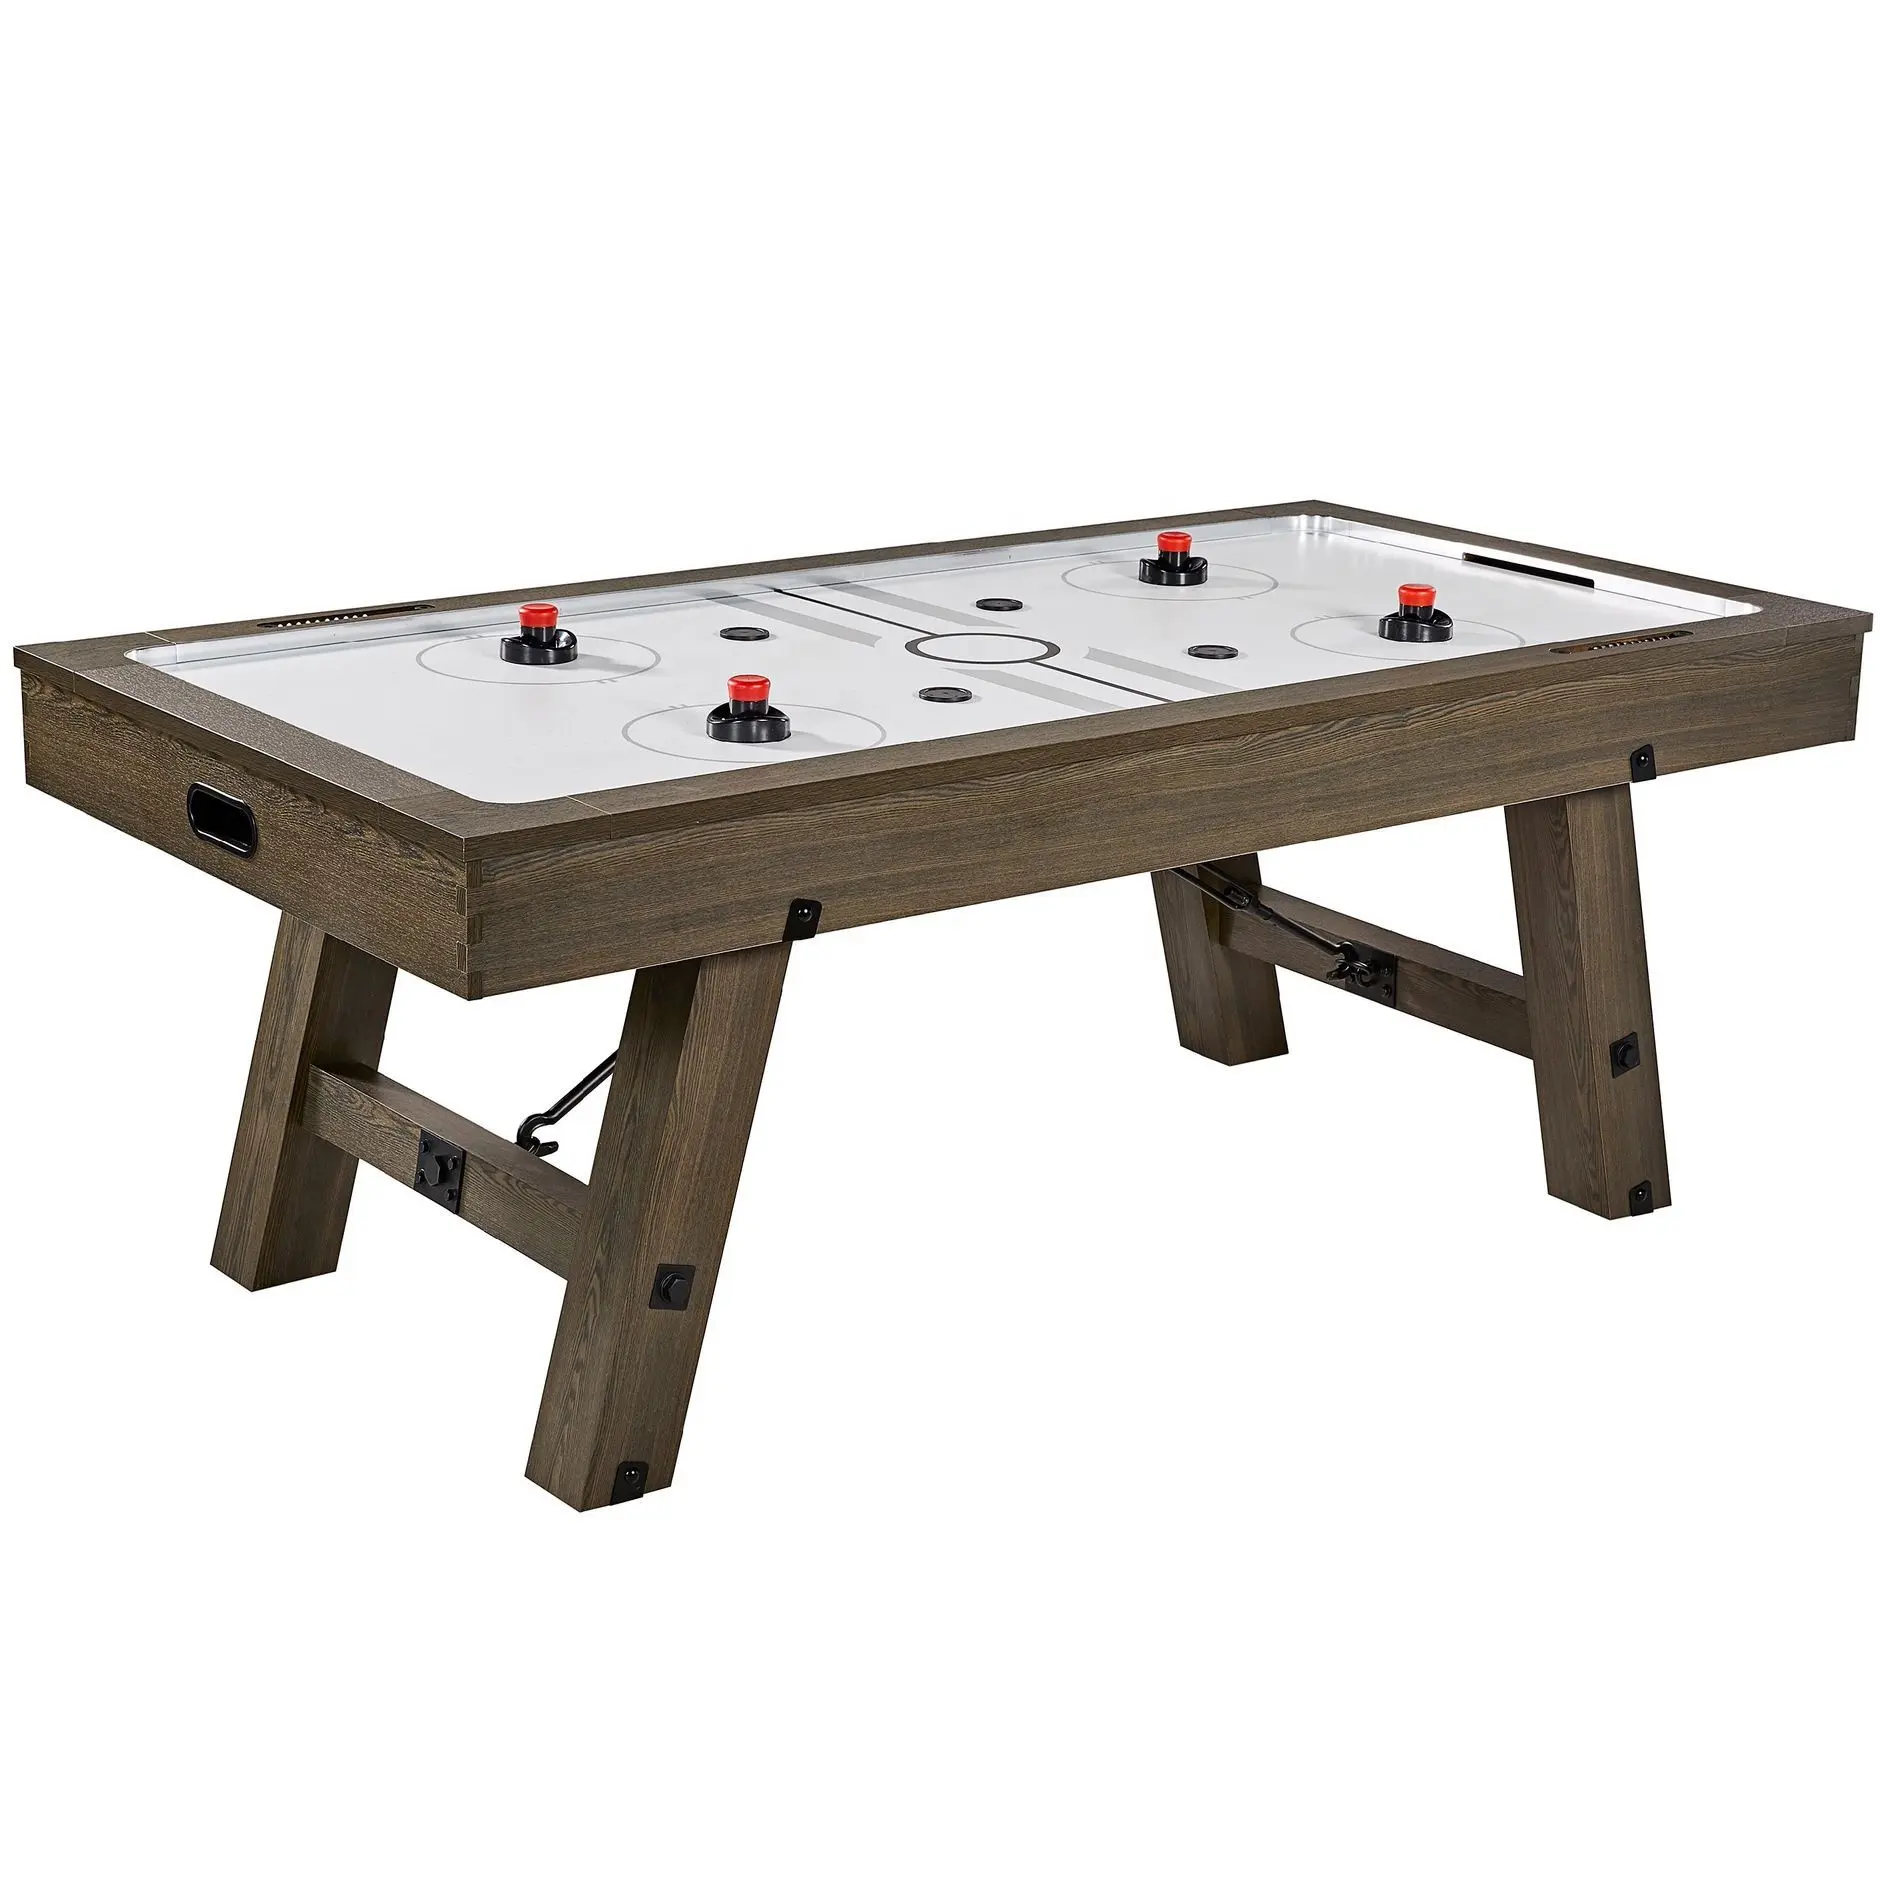 Hot sale 7 ft industrial design Air Hockey Table